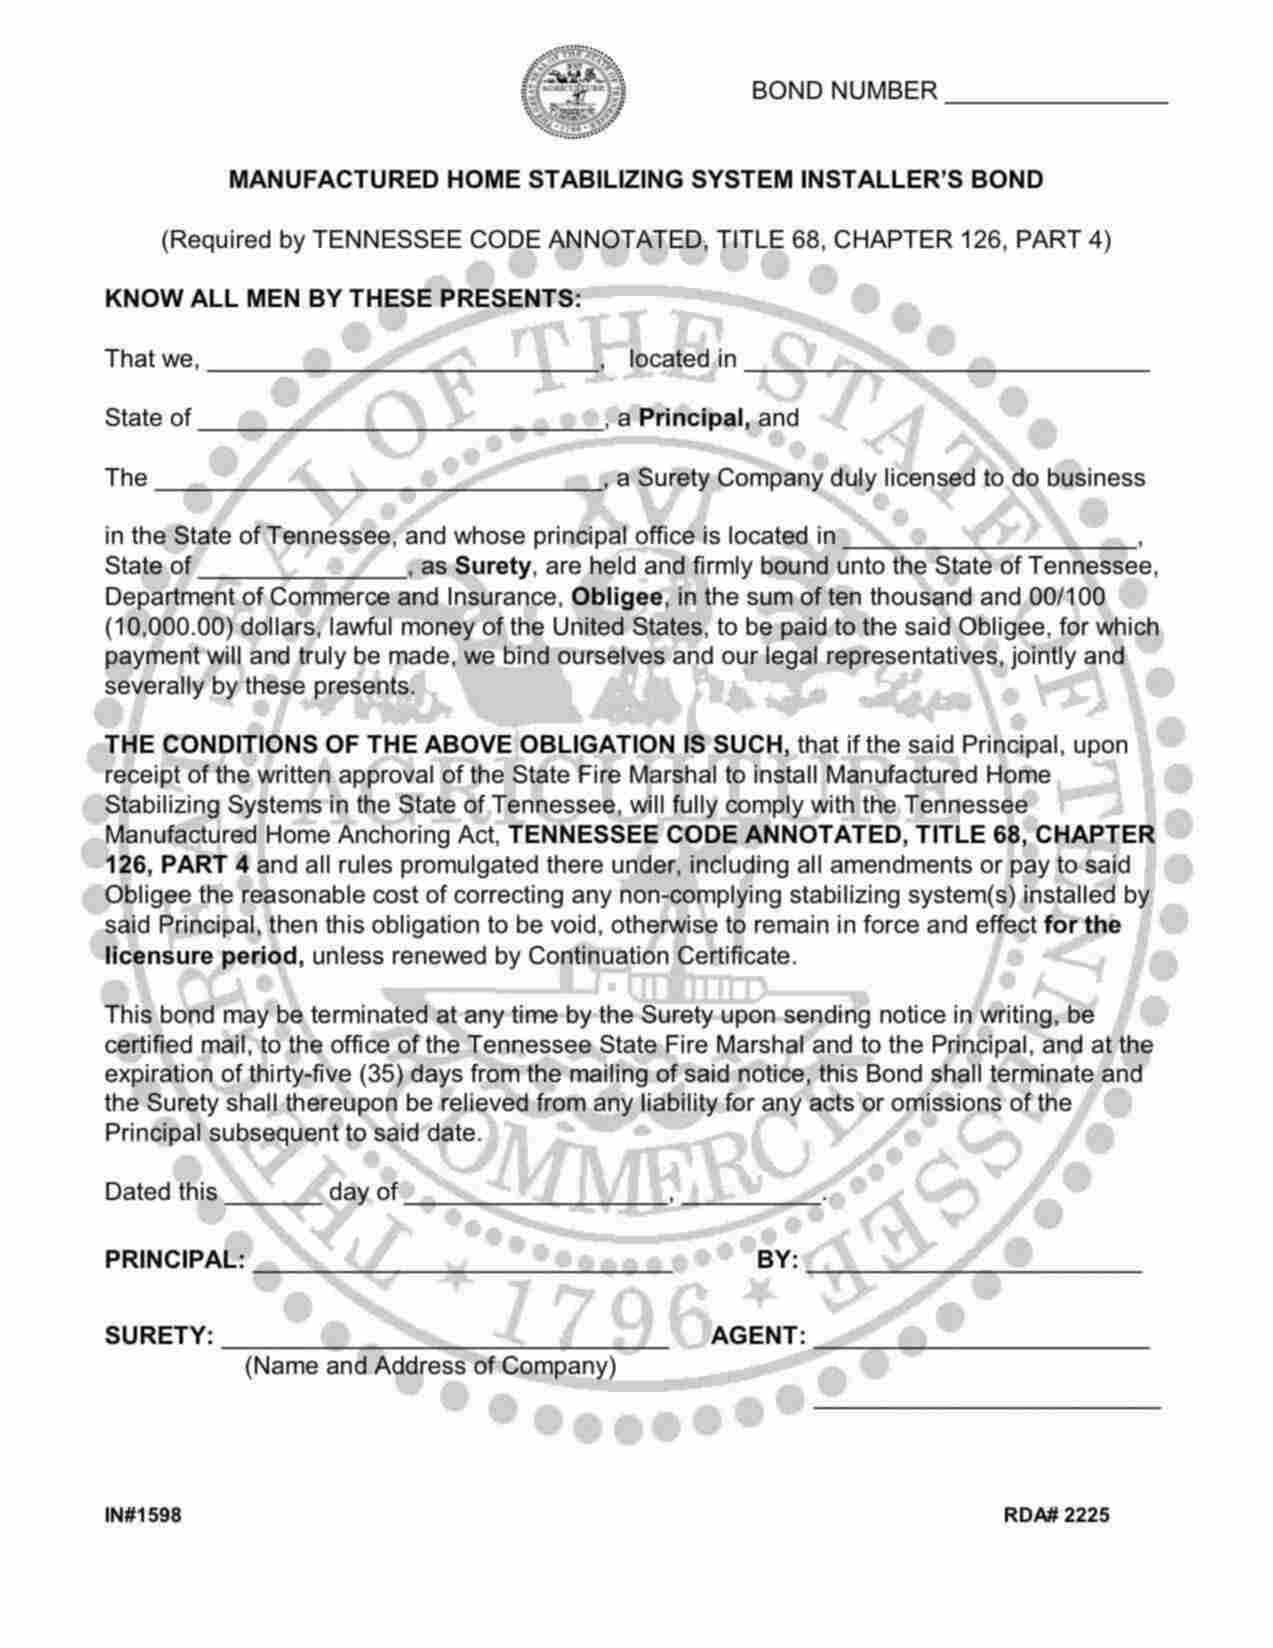 Tennessee Manufactured Home Stabilizing System Installer Bond Form